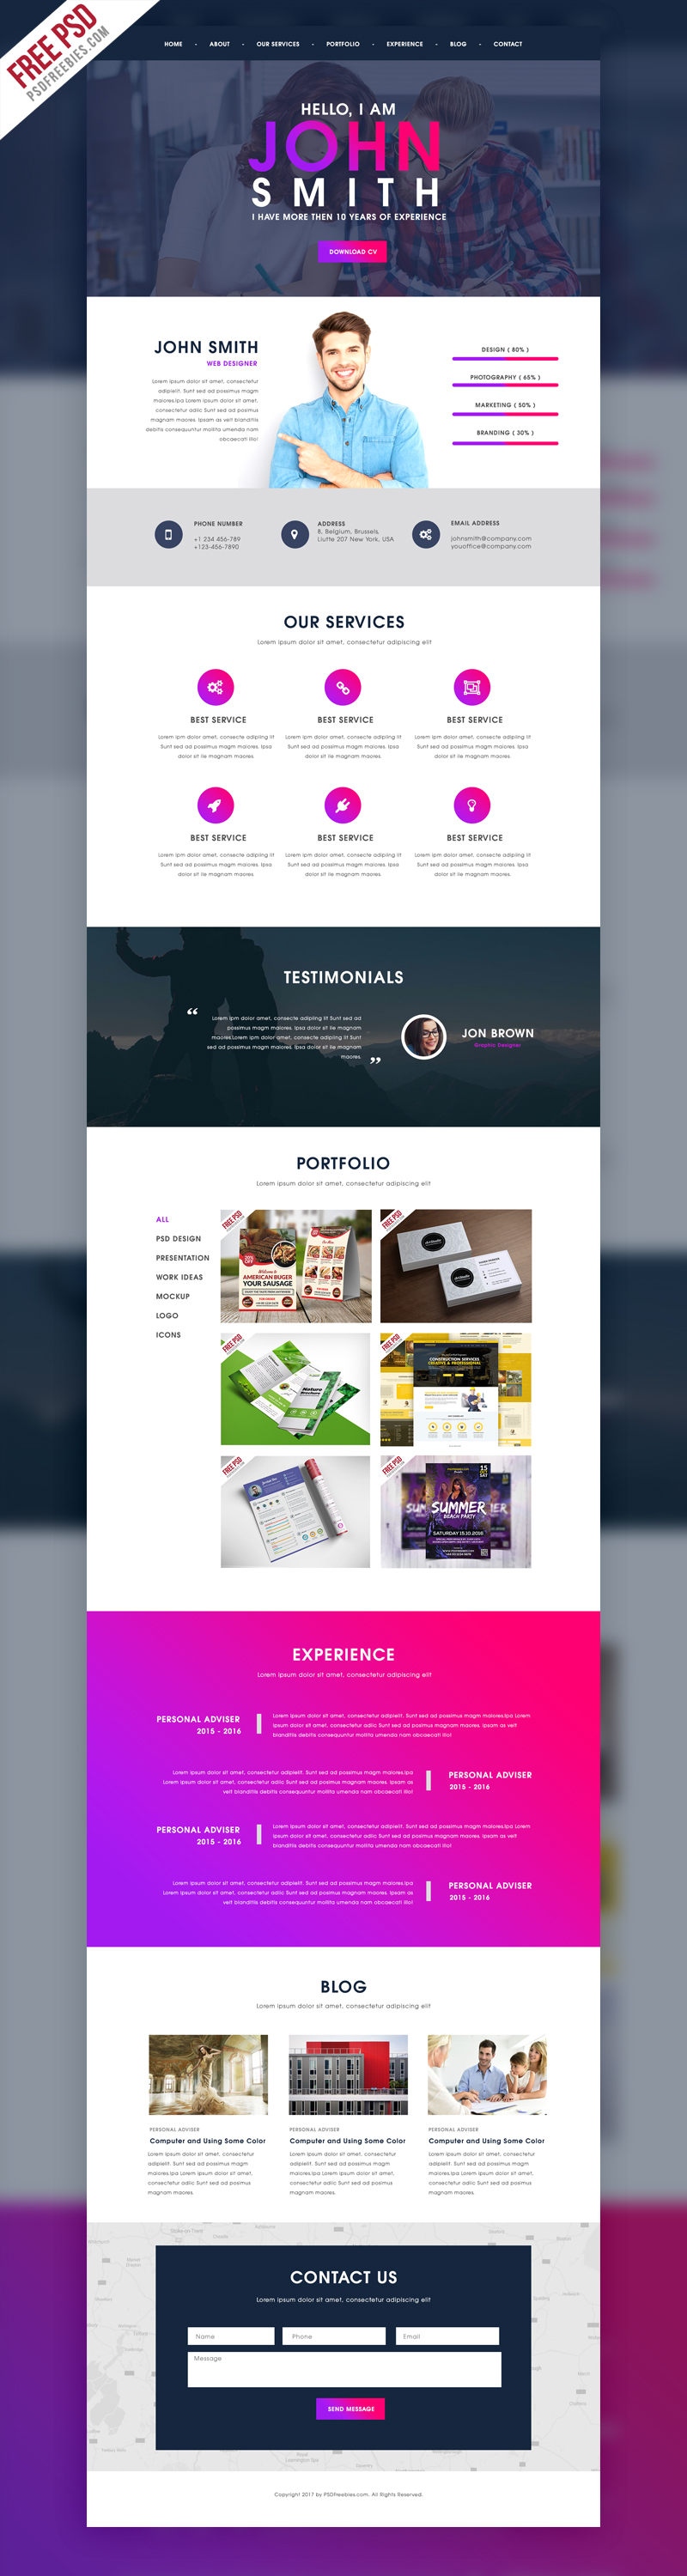 Download Freebie Creative One Page Portfolio Website Template Psd By Psd Freebies On Dribbble PSD Mockup Templates